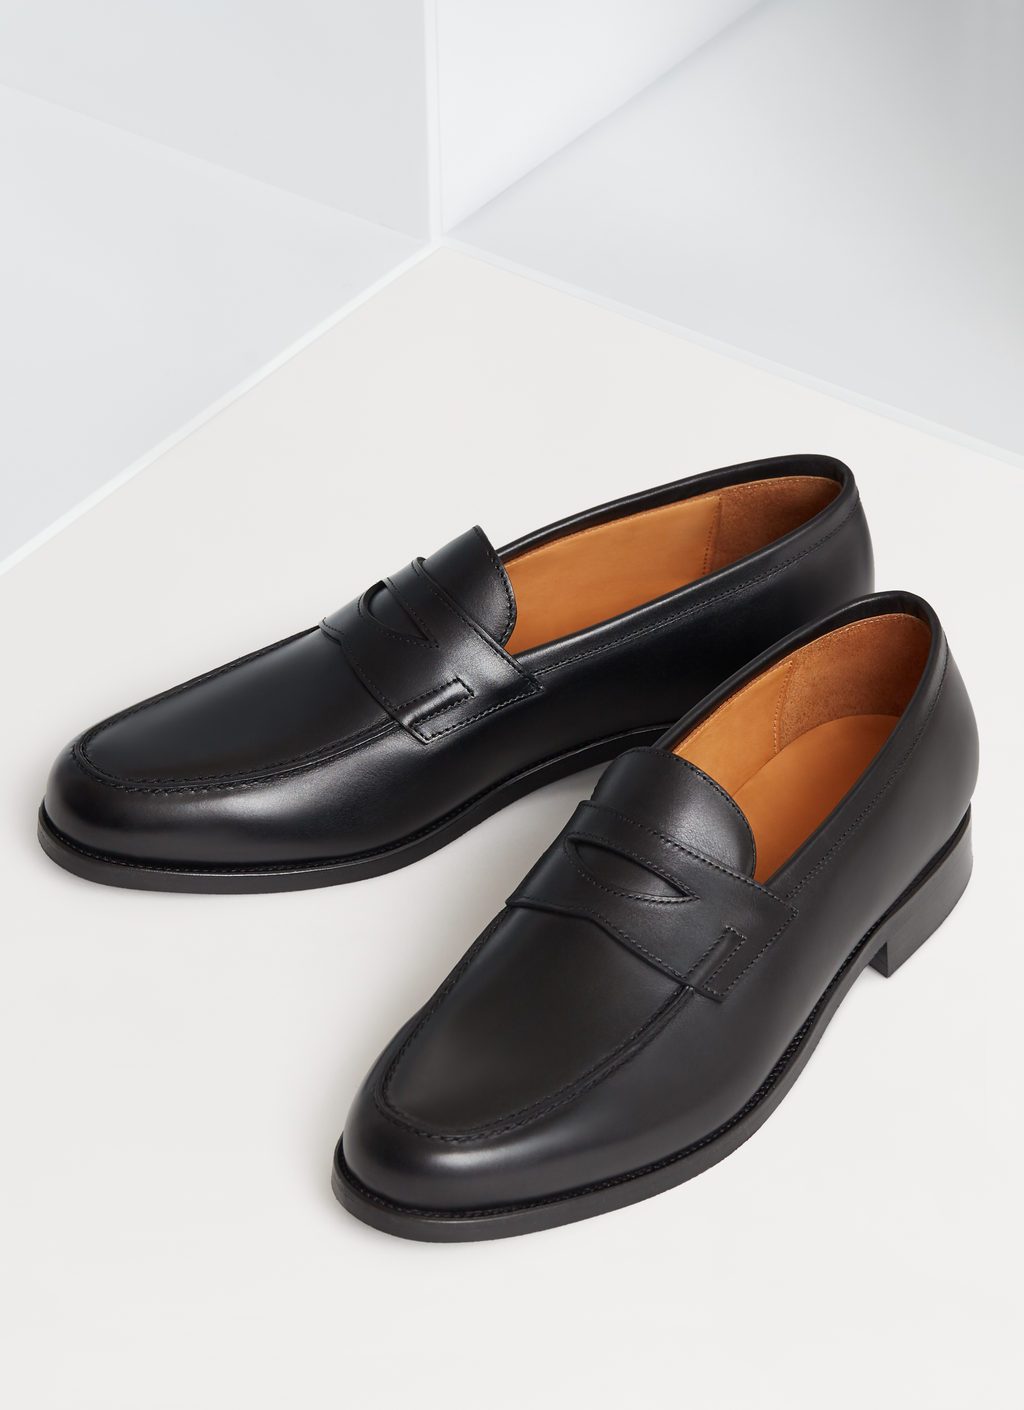 A New Approach To Men's Shoes – Jack Erwin